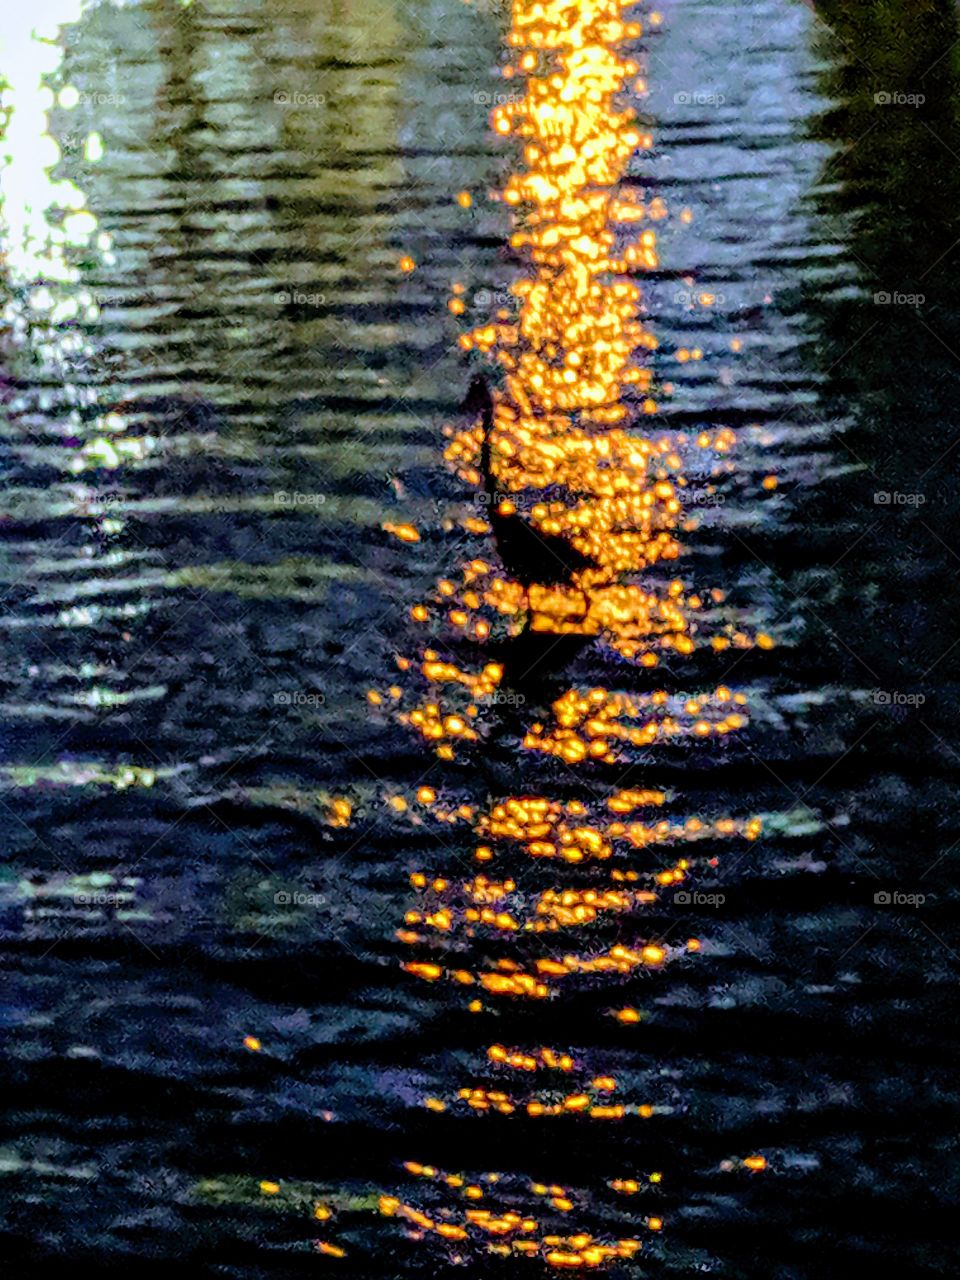 Bird in the Water Early Evening